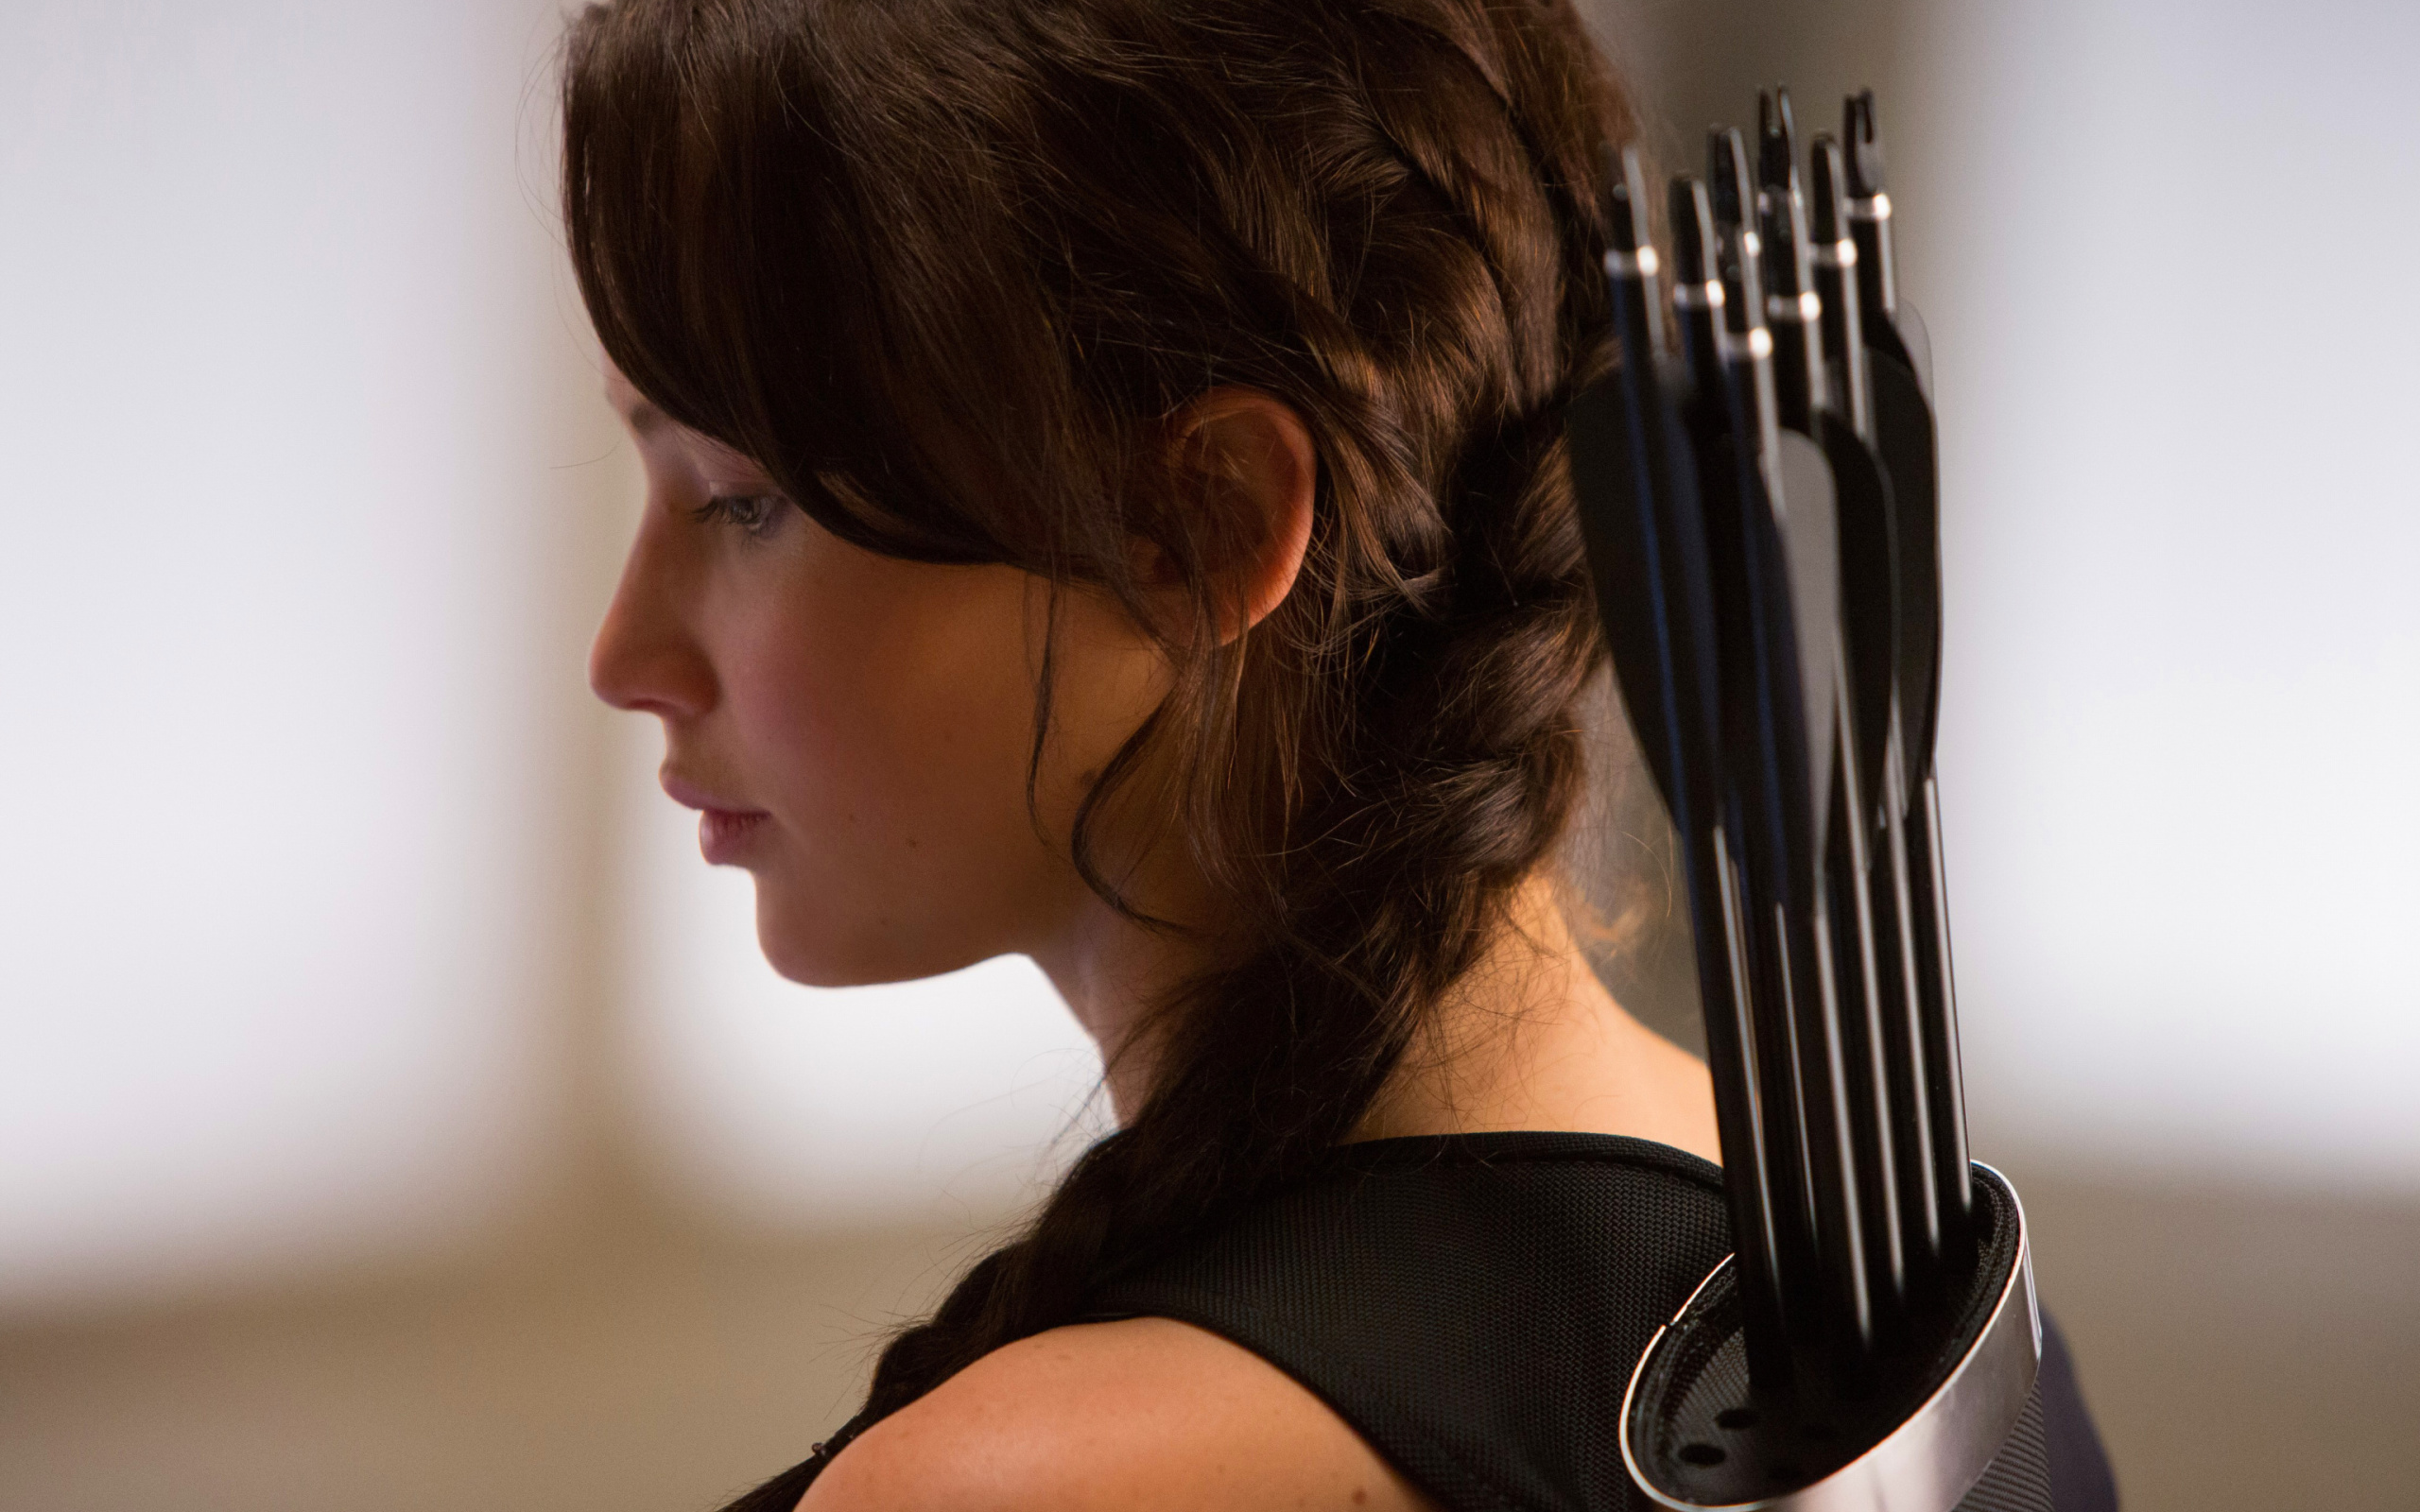 Jennifer lawrence in The Hunger Games Catching Fire screenshot #1 2560x1600